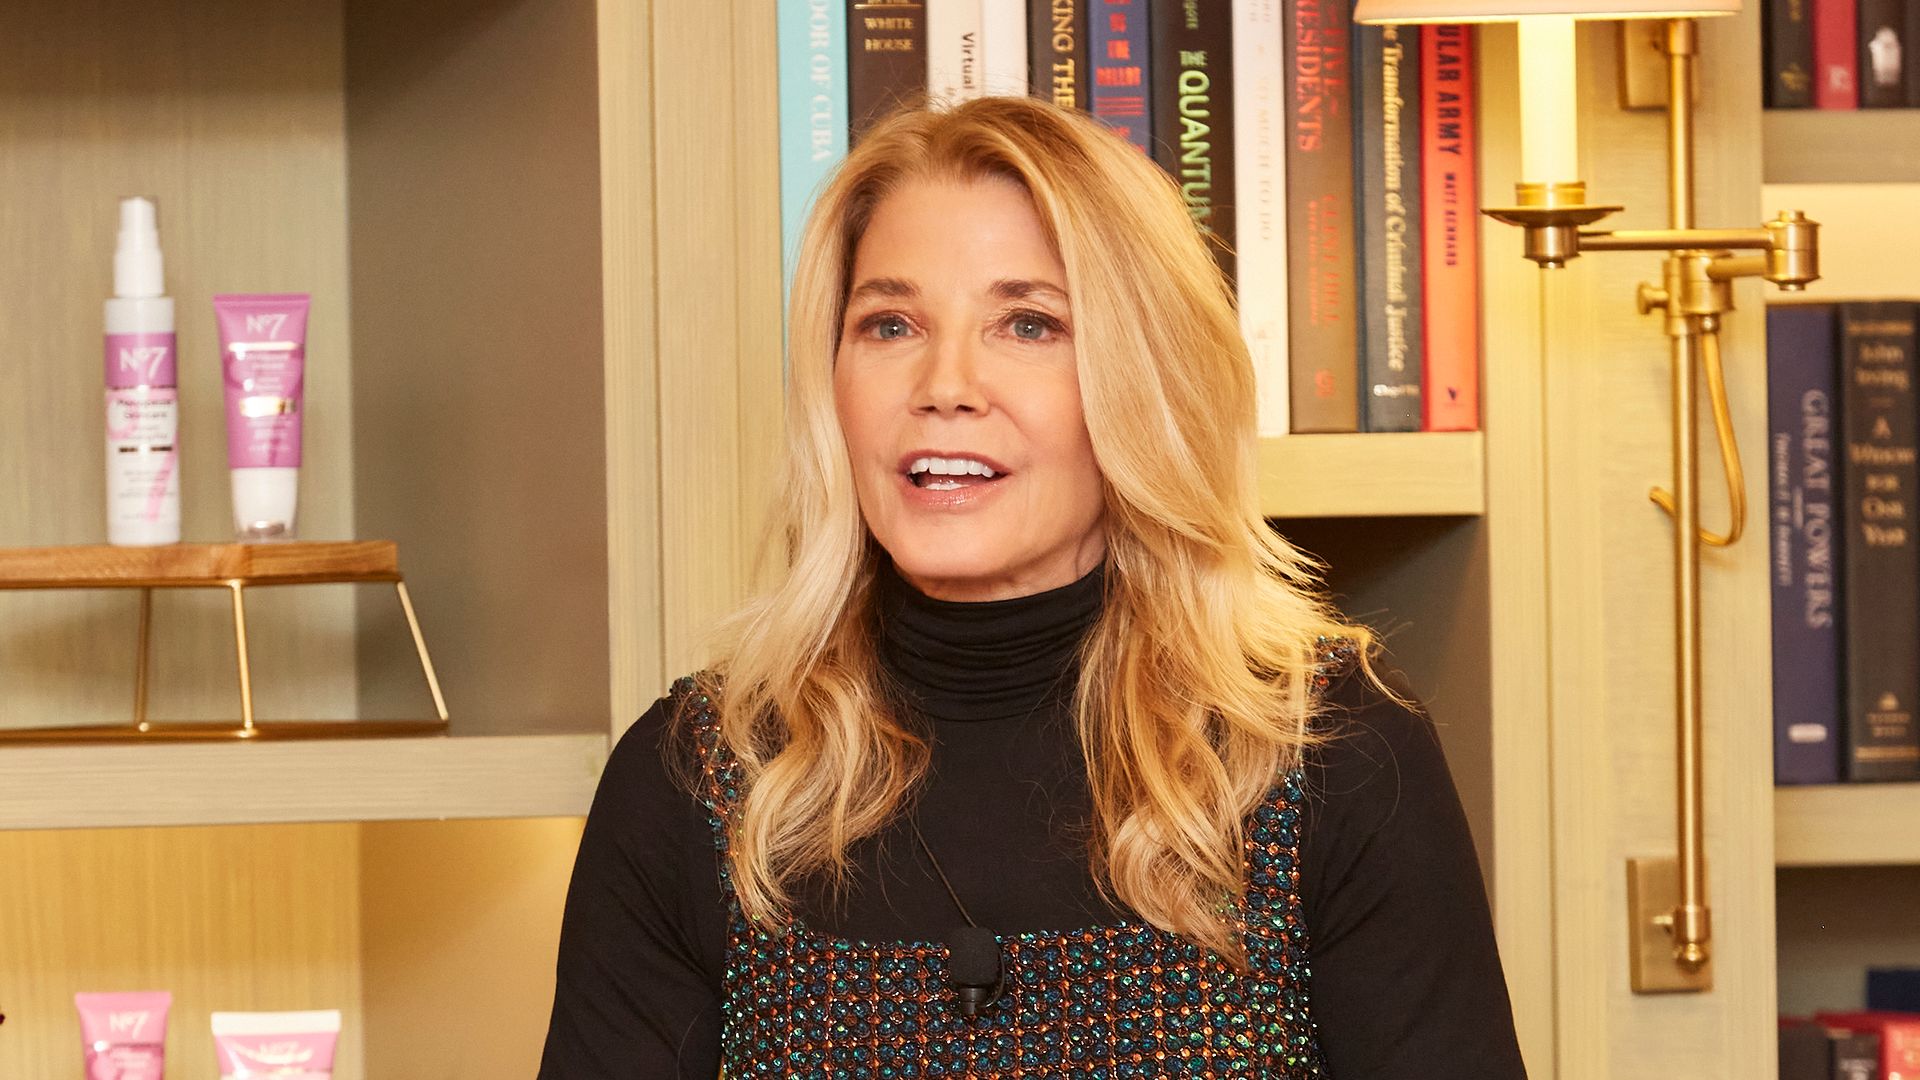 Candace Bushnell speaks about menopause during a panel discussion held at NYC's Whitby Hotel on October 18.